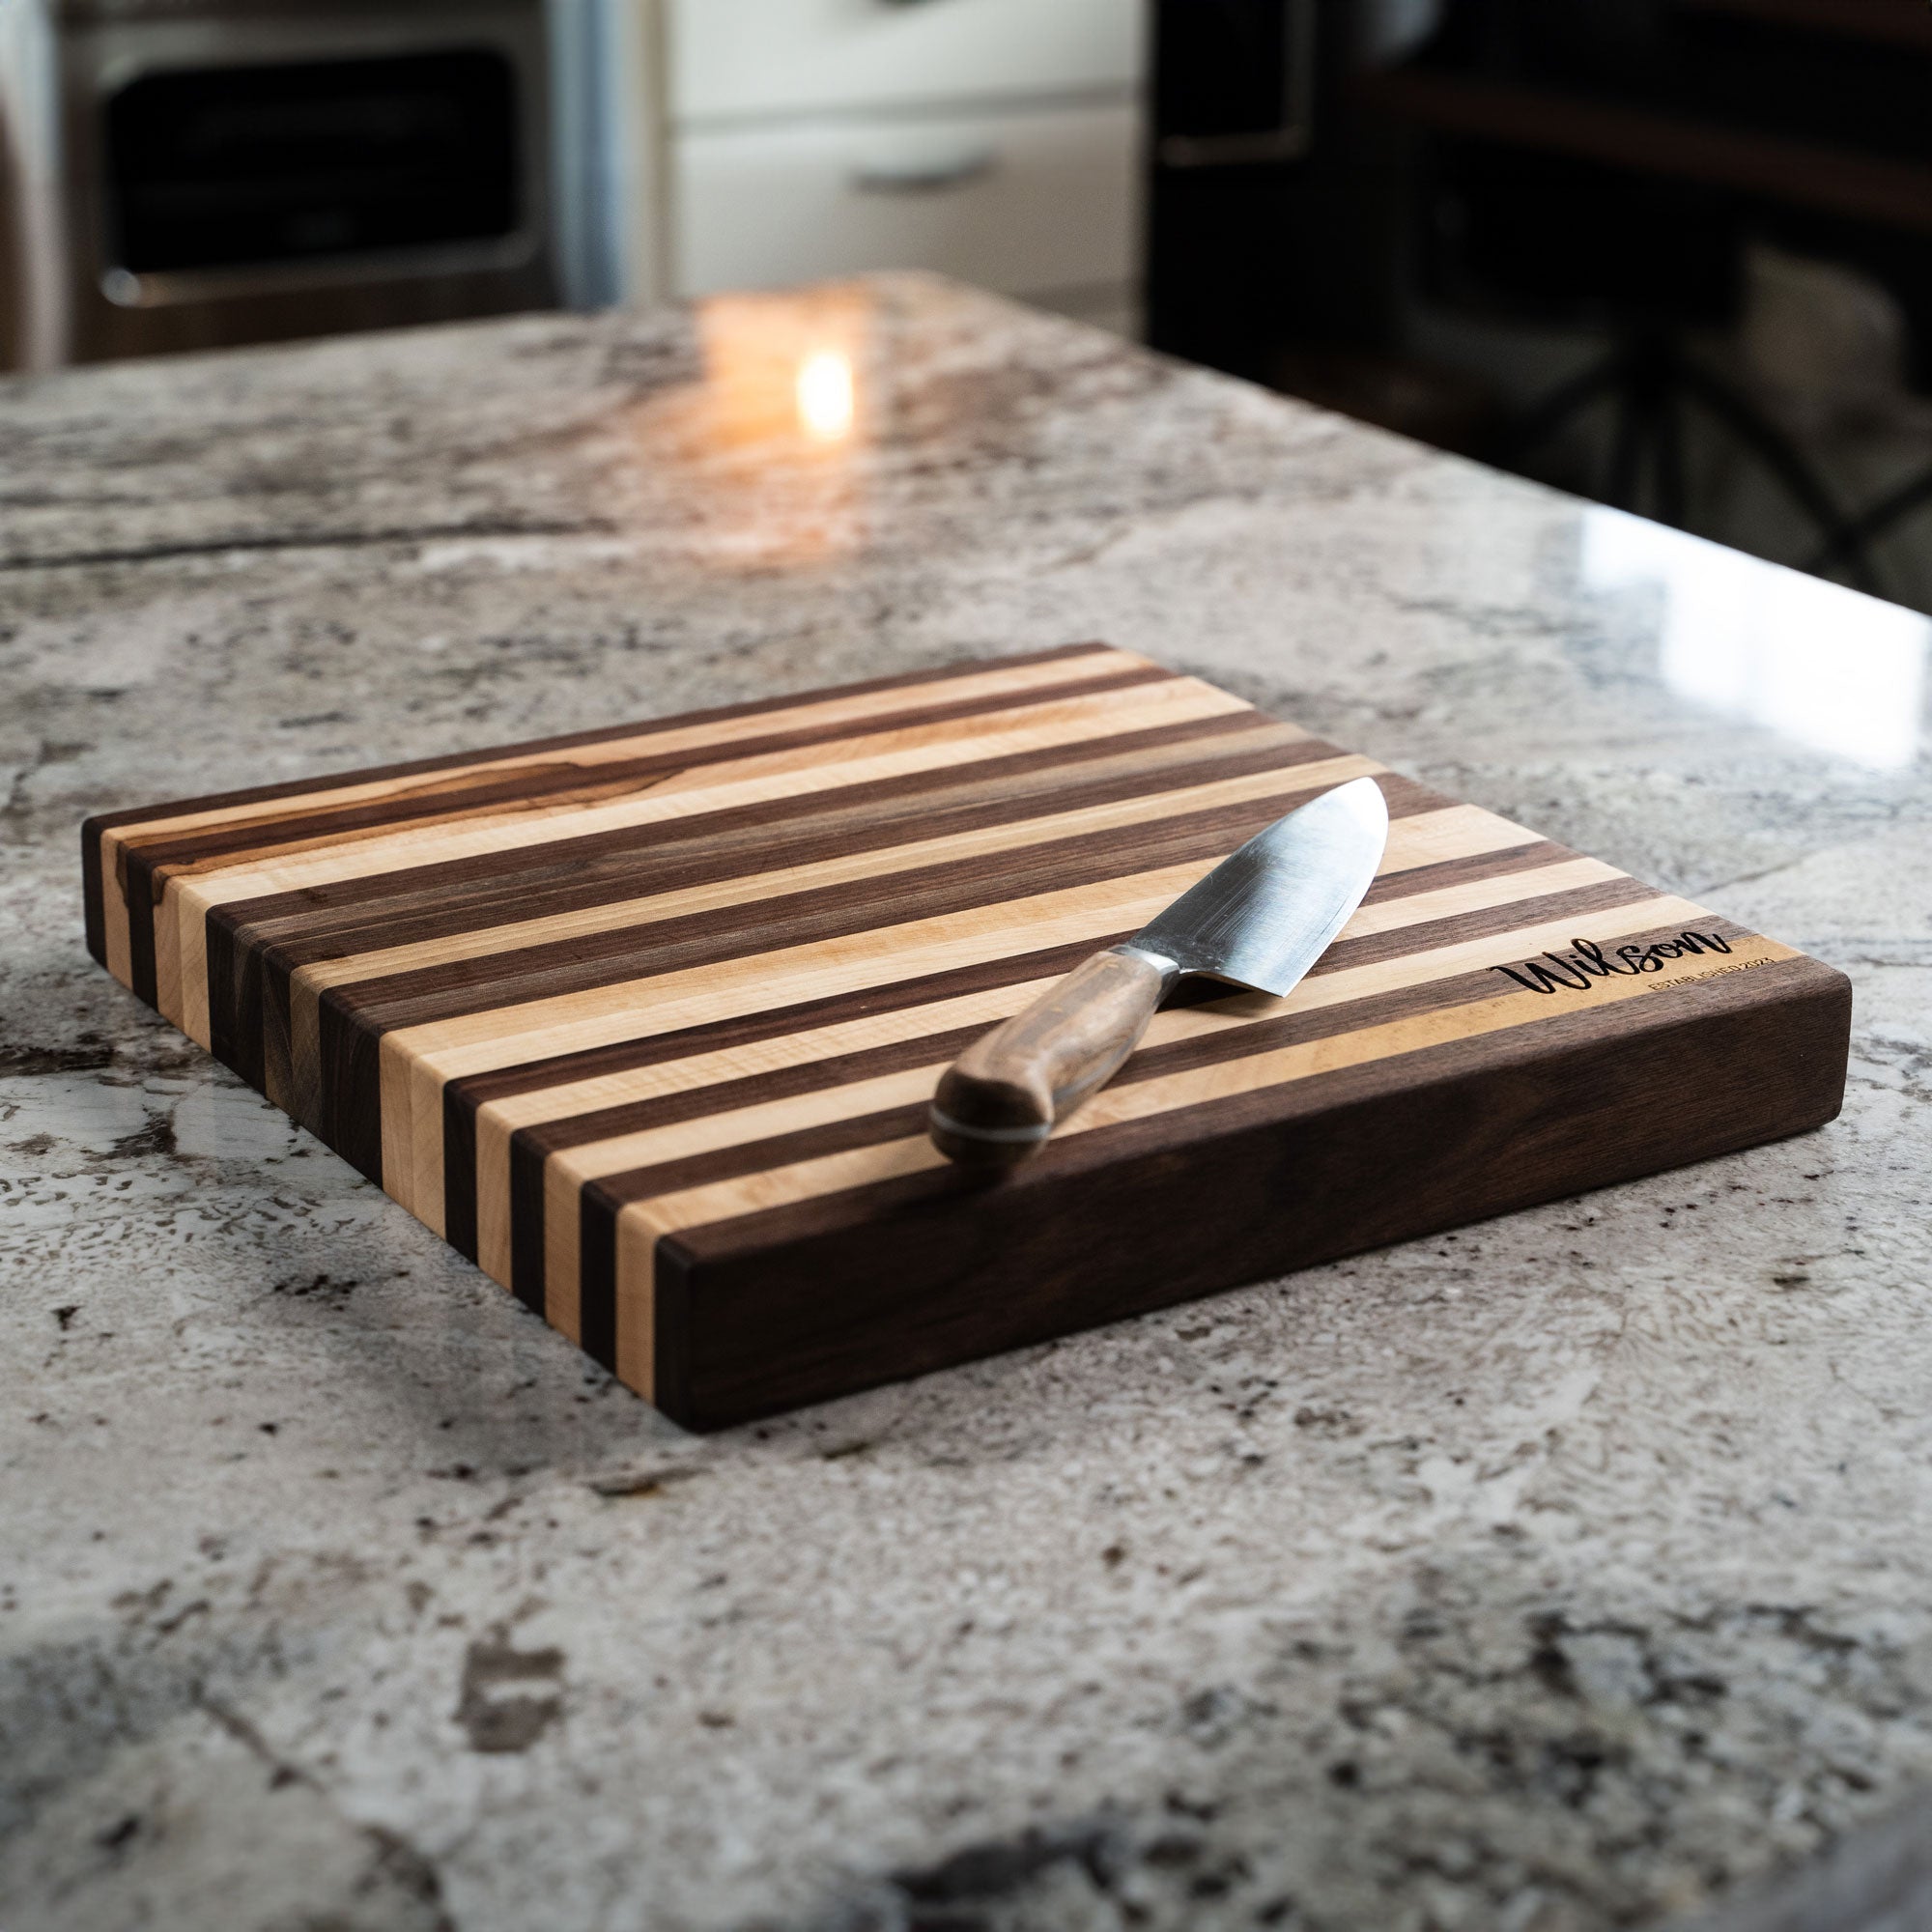 American Maple Wood Butcher Block Cutting Board, Small - 13.5in x 13.5in / Remove Handles (-$5.00)at Holtz Leather